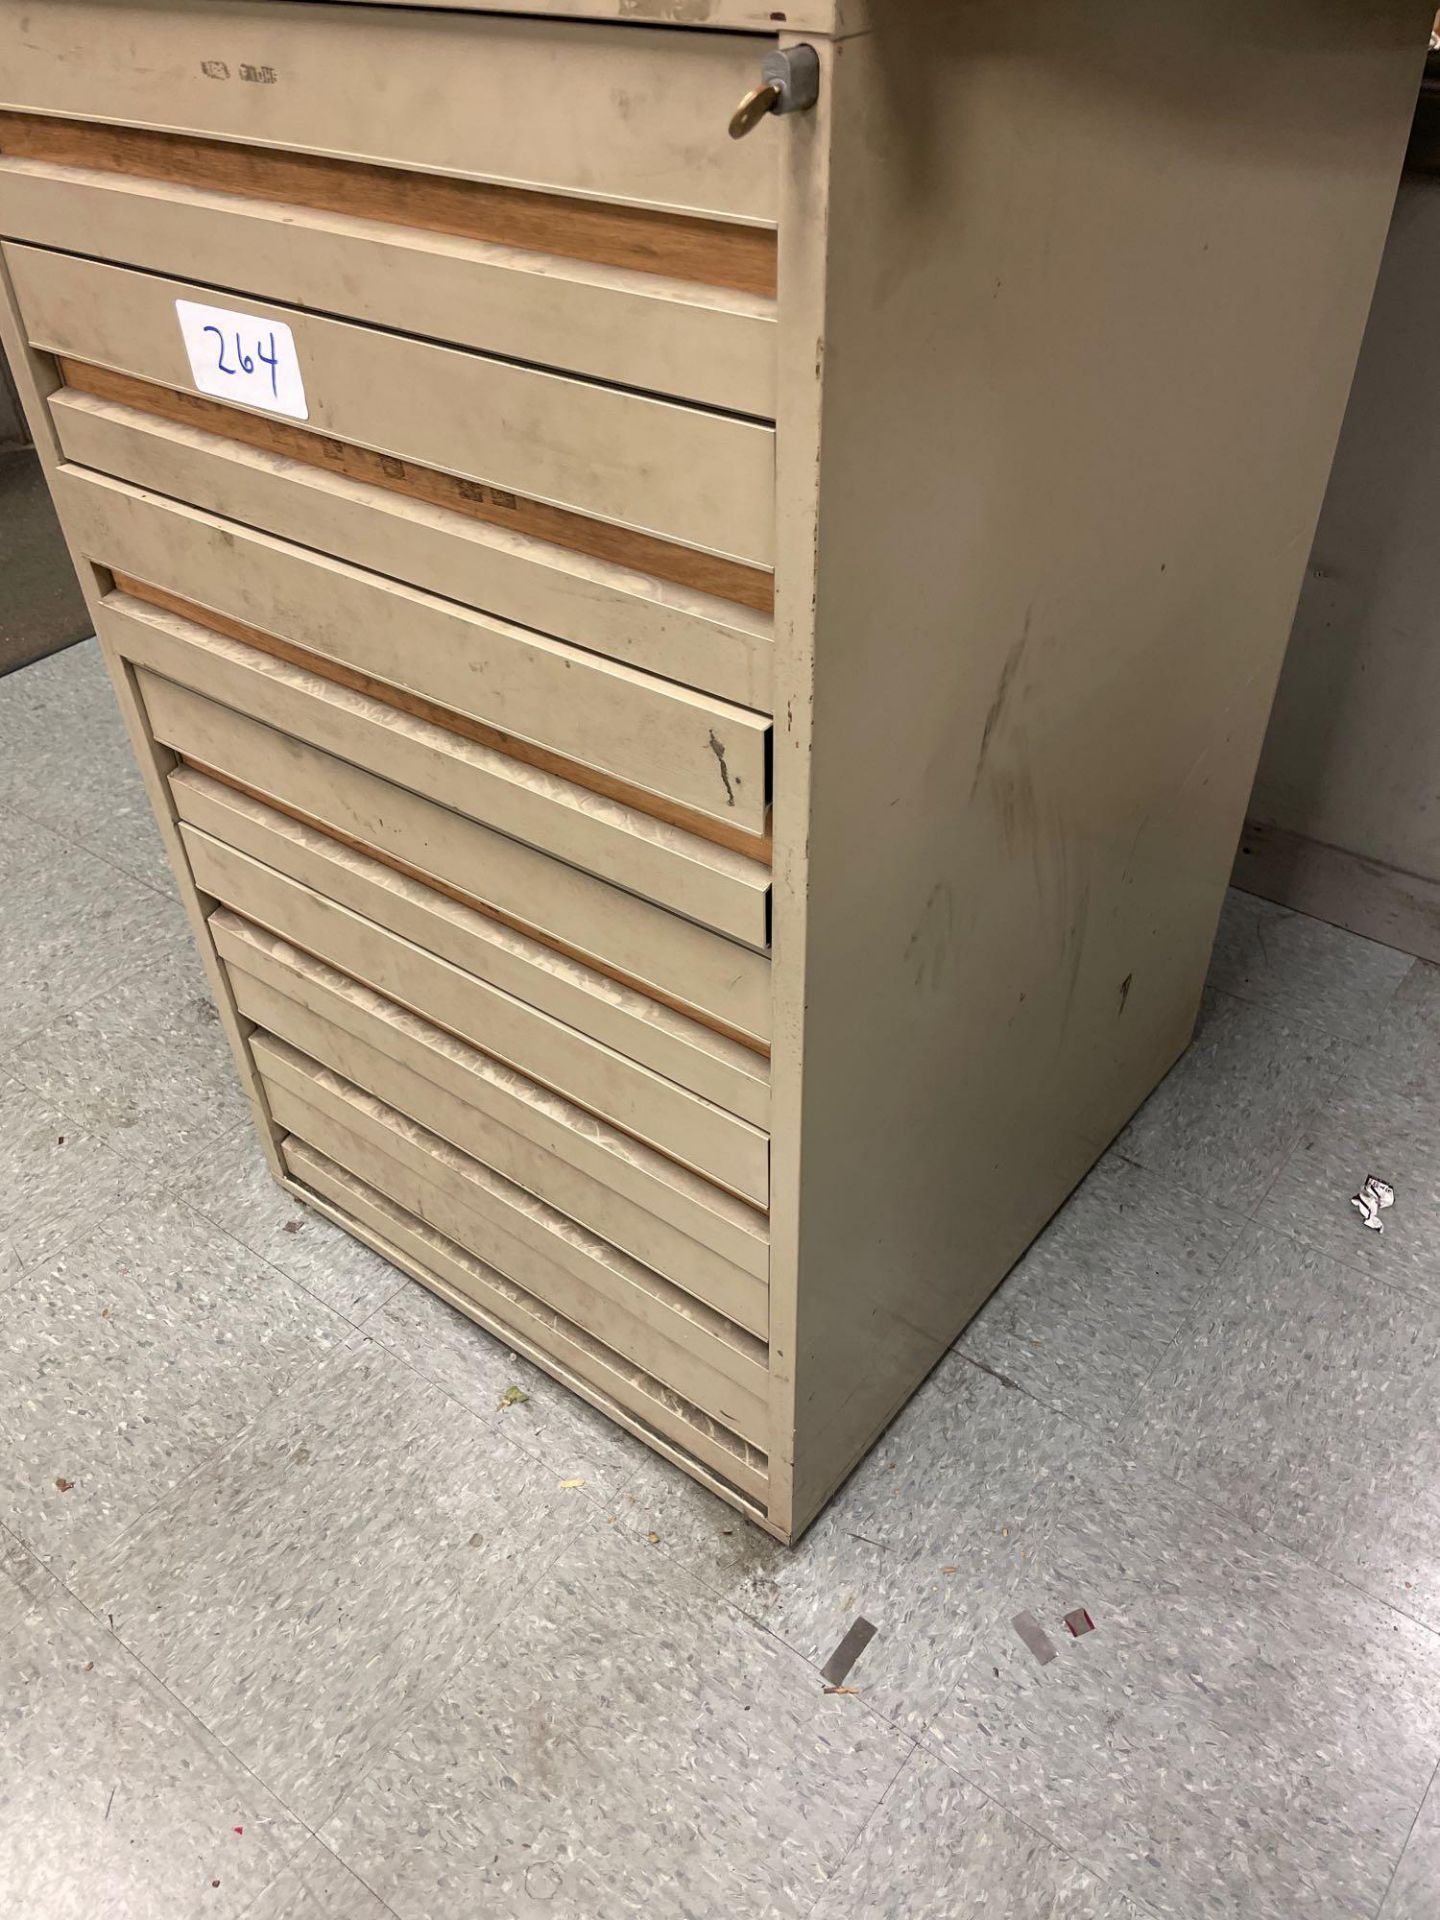 8 Drawer Microform Cabinet - Image 3 of 3